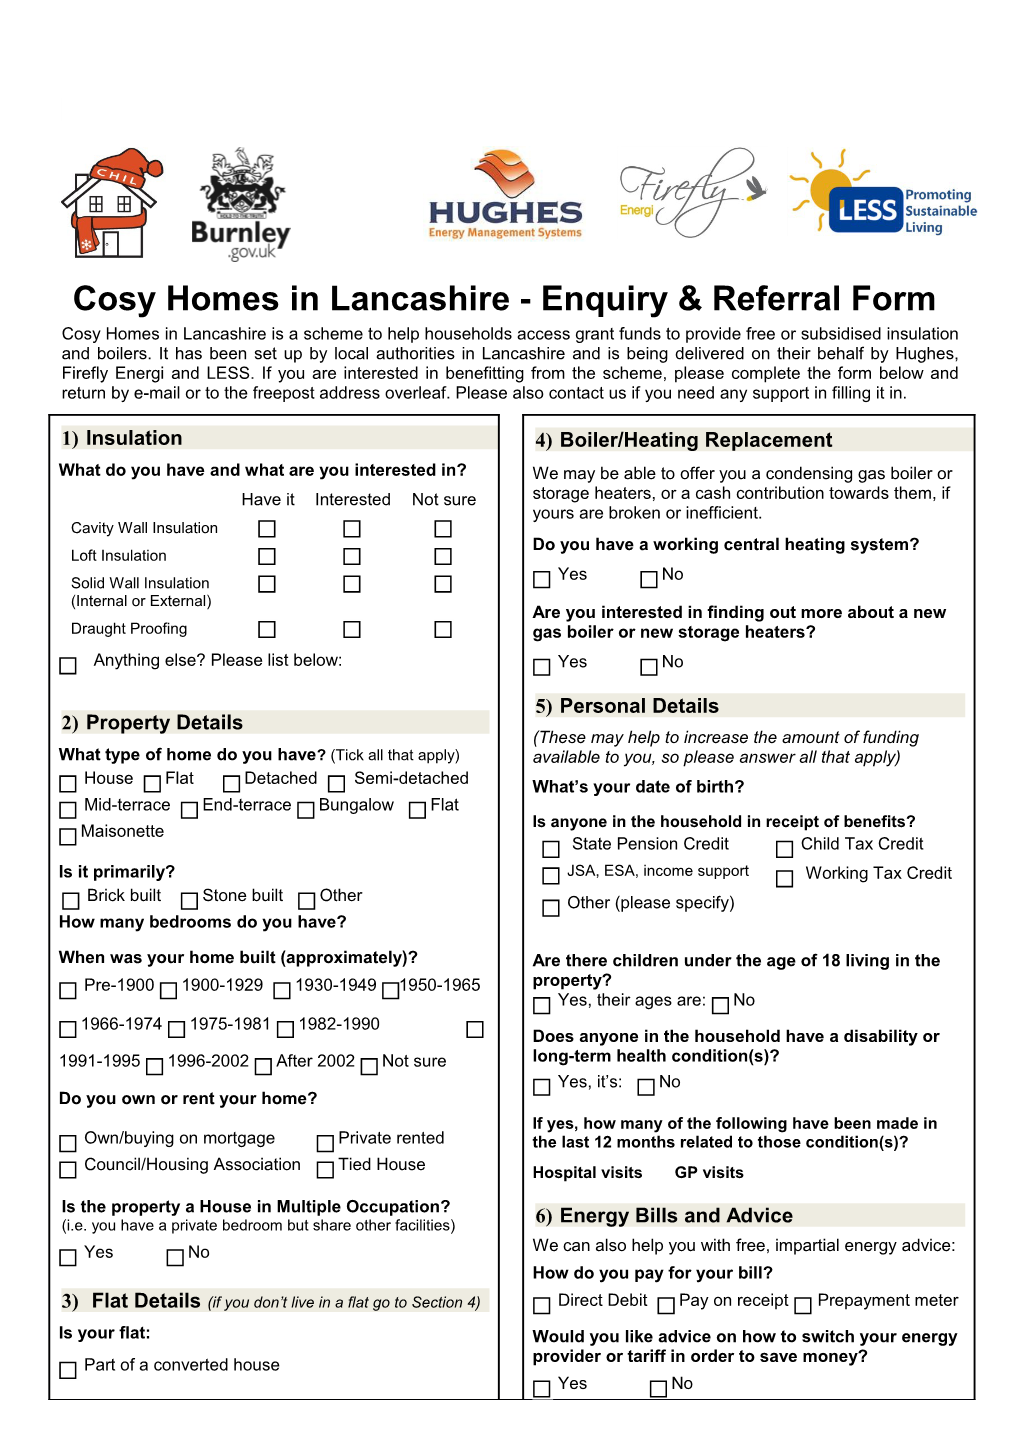 Cosy Homes in Lancashire - Enquiry & Referral Form